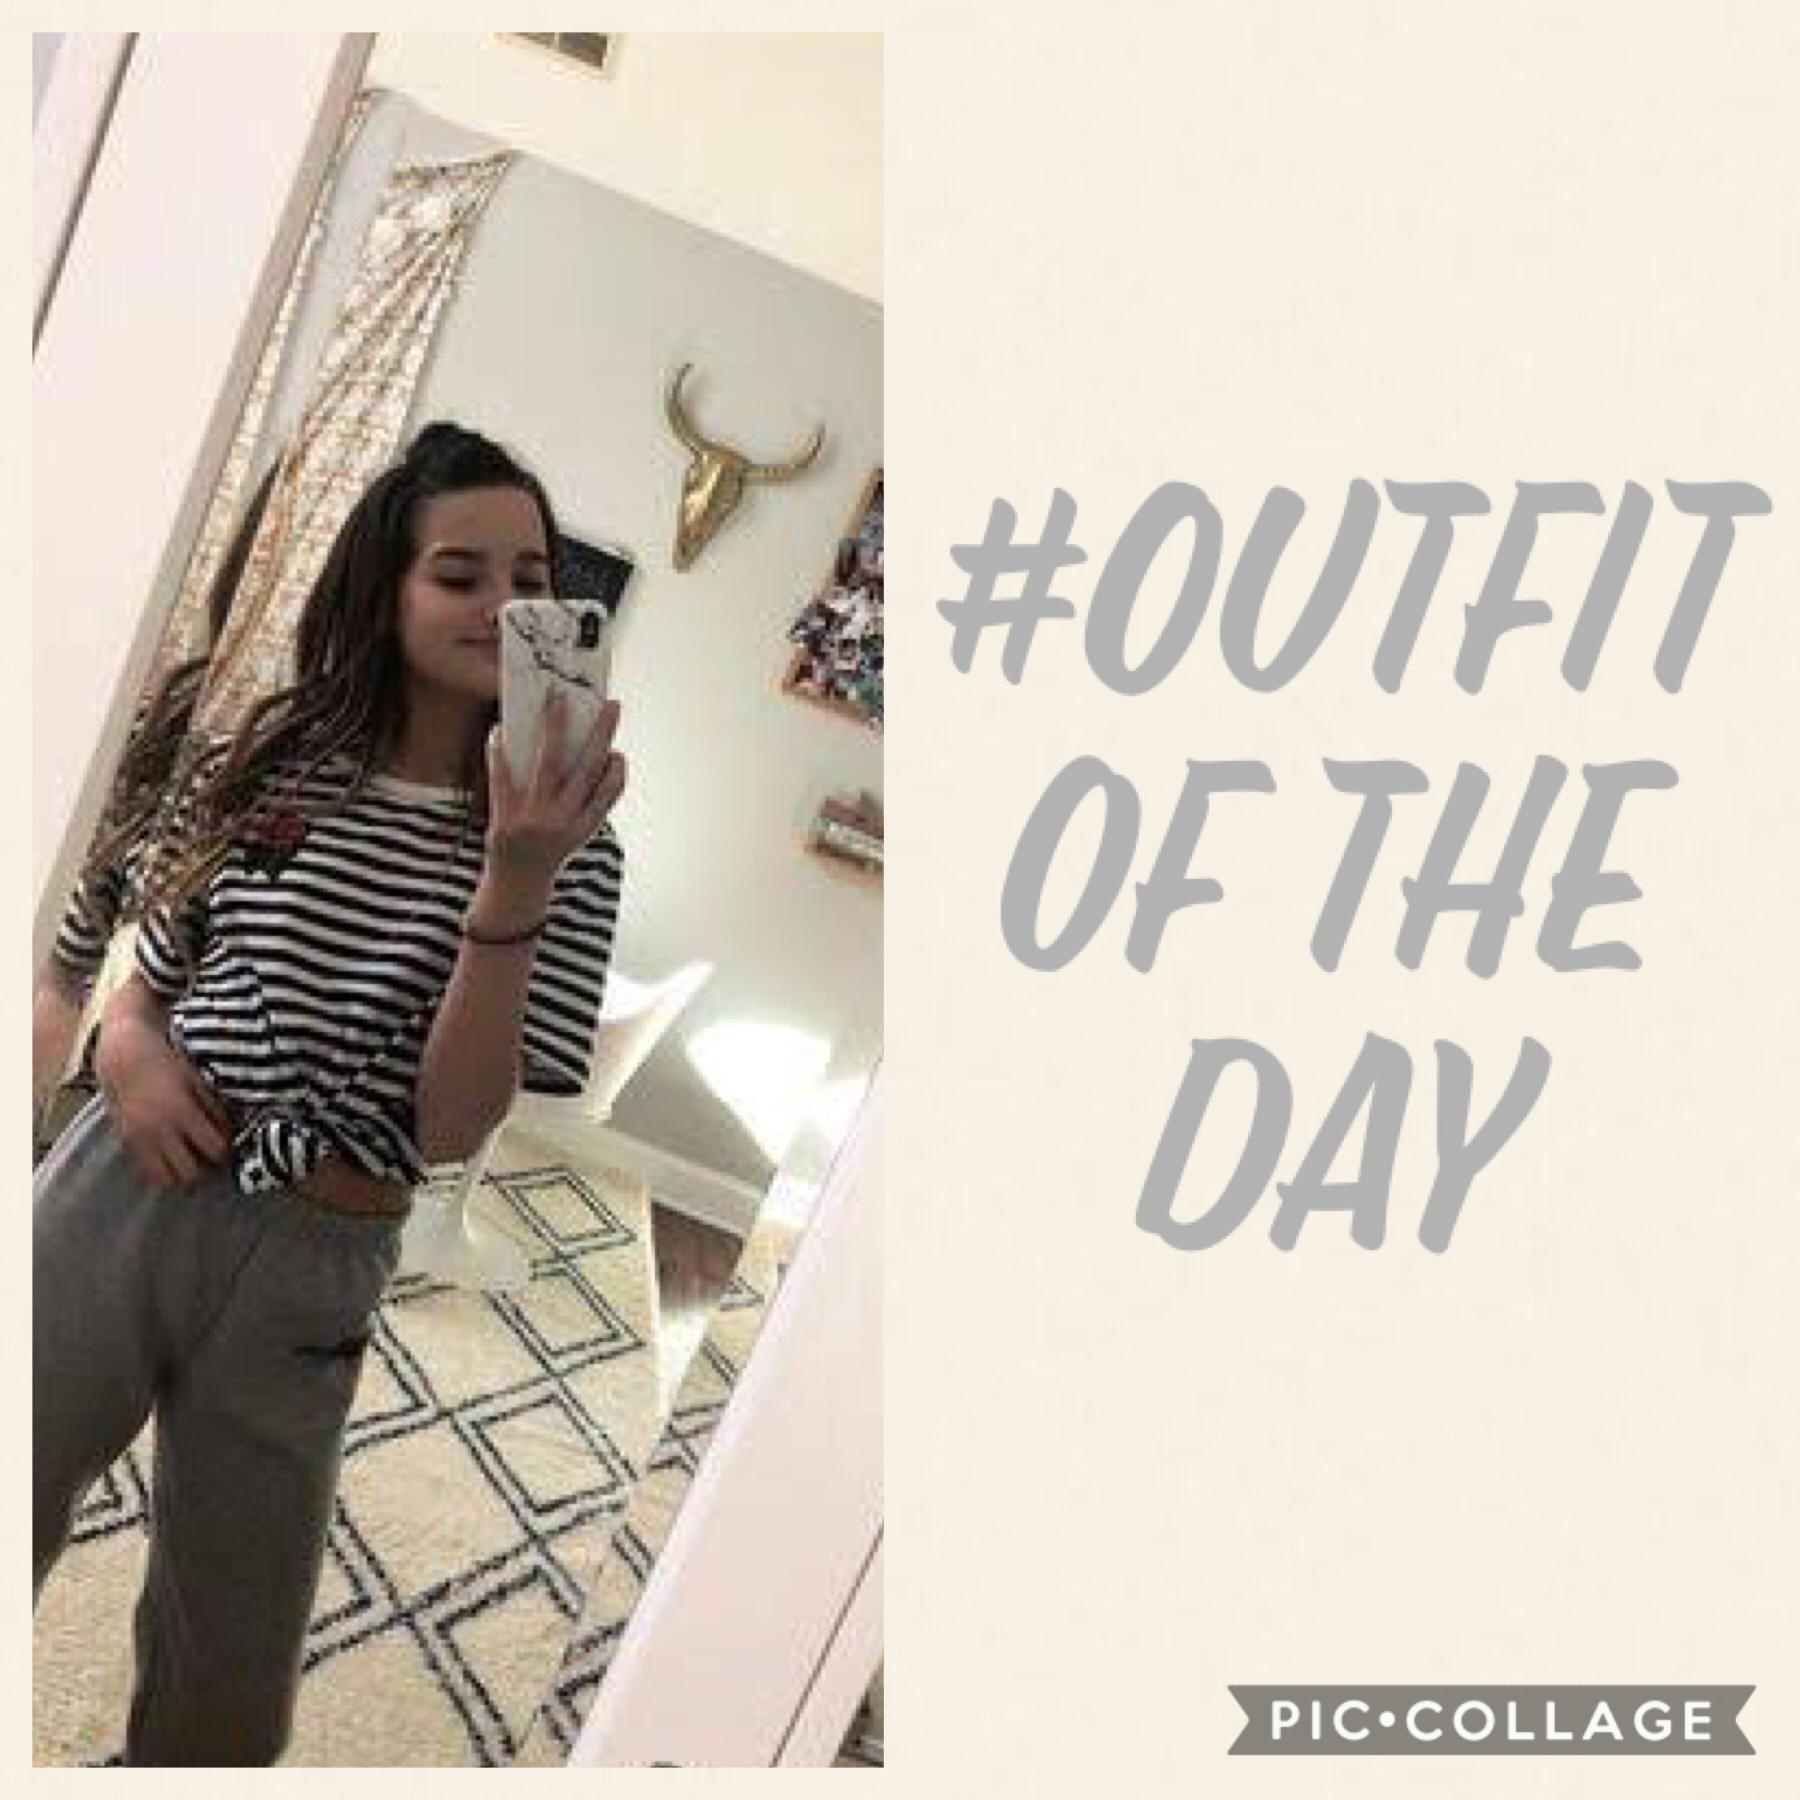 #Outfit of the day 